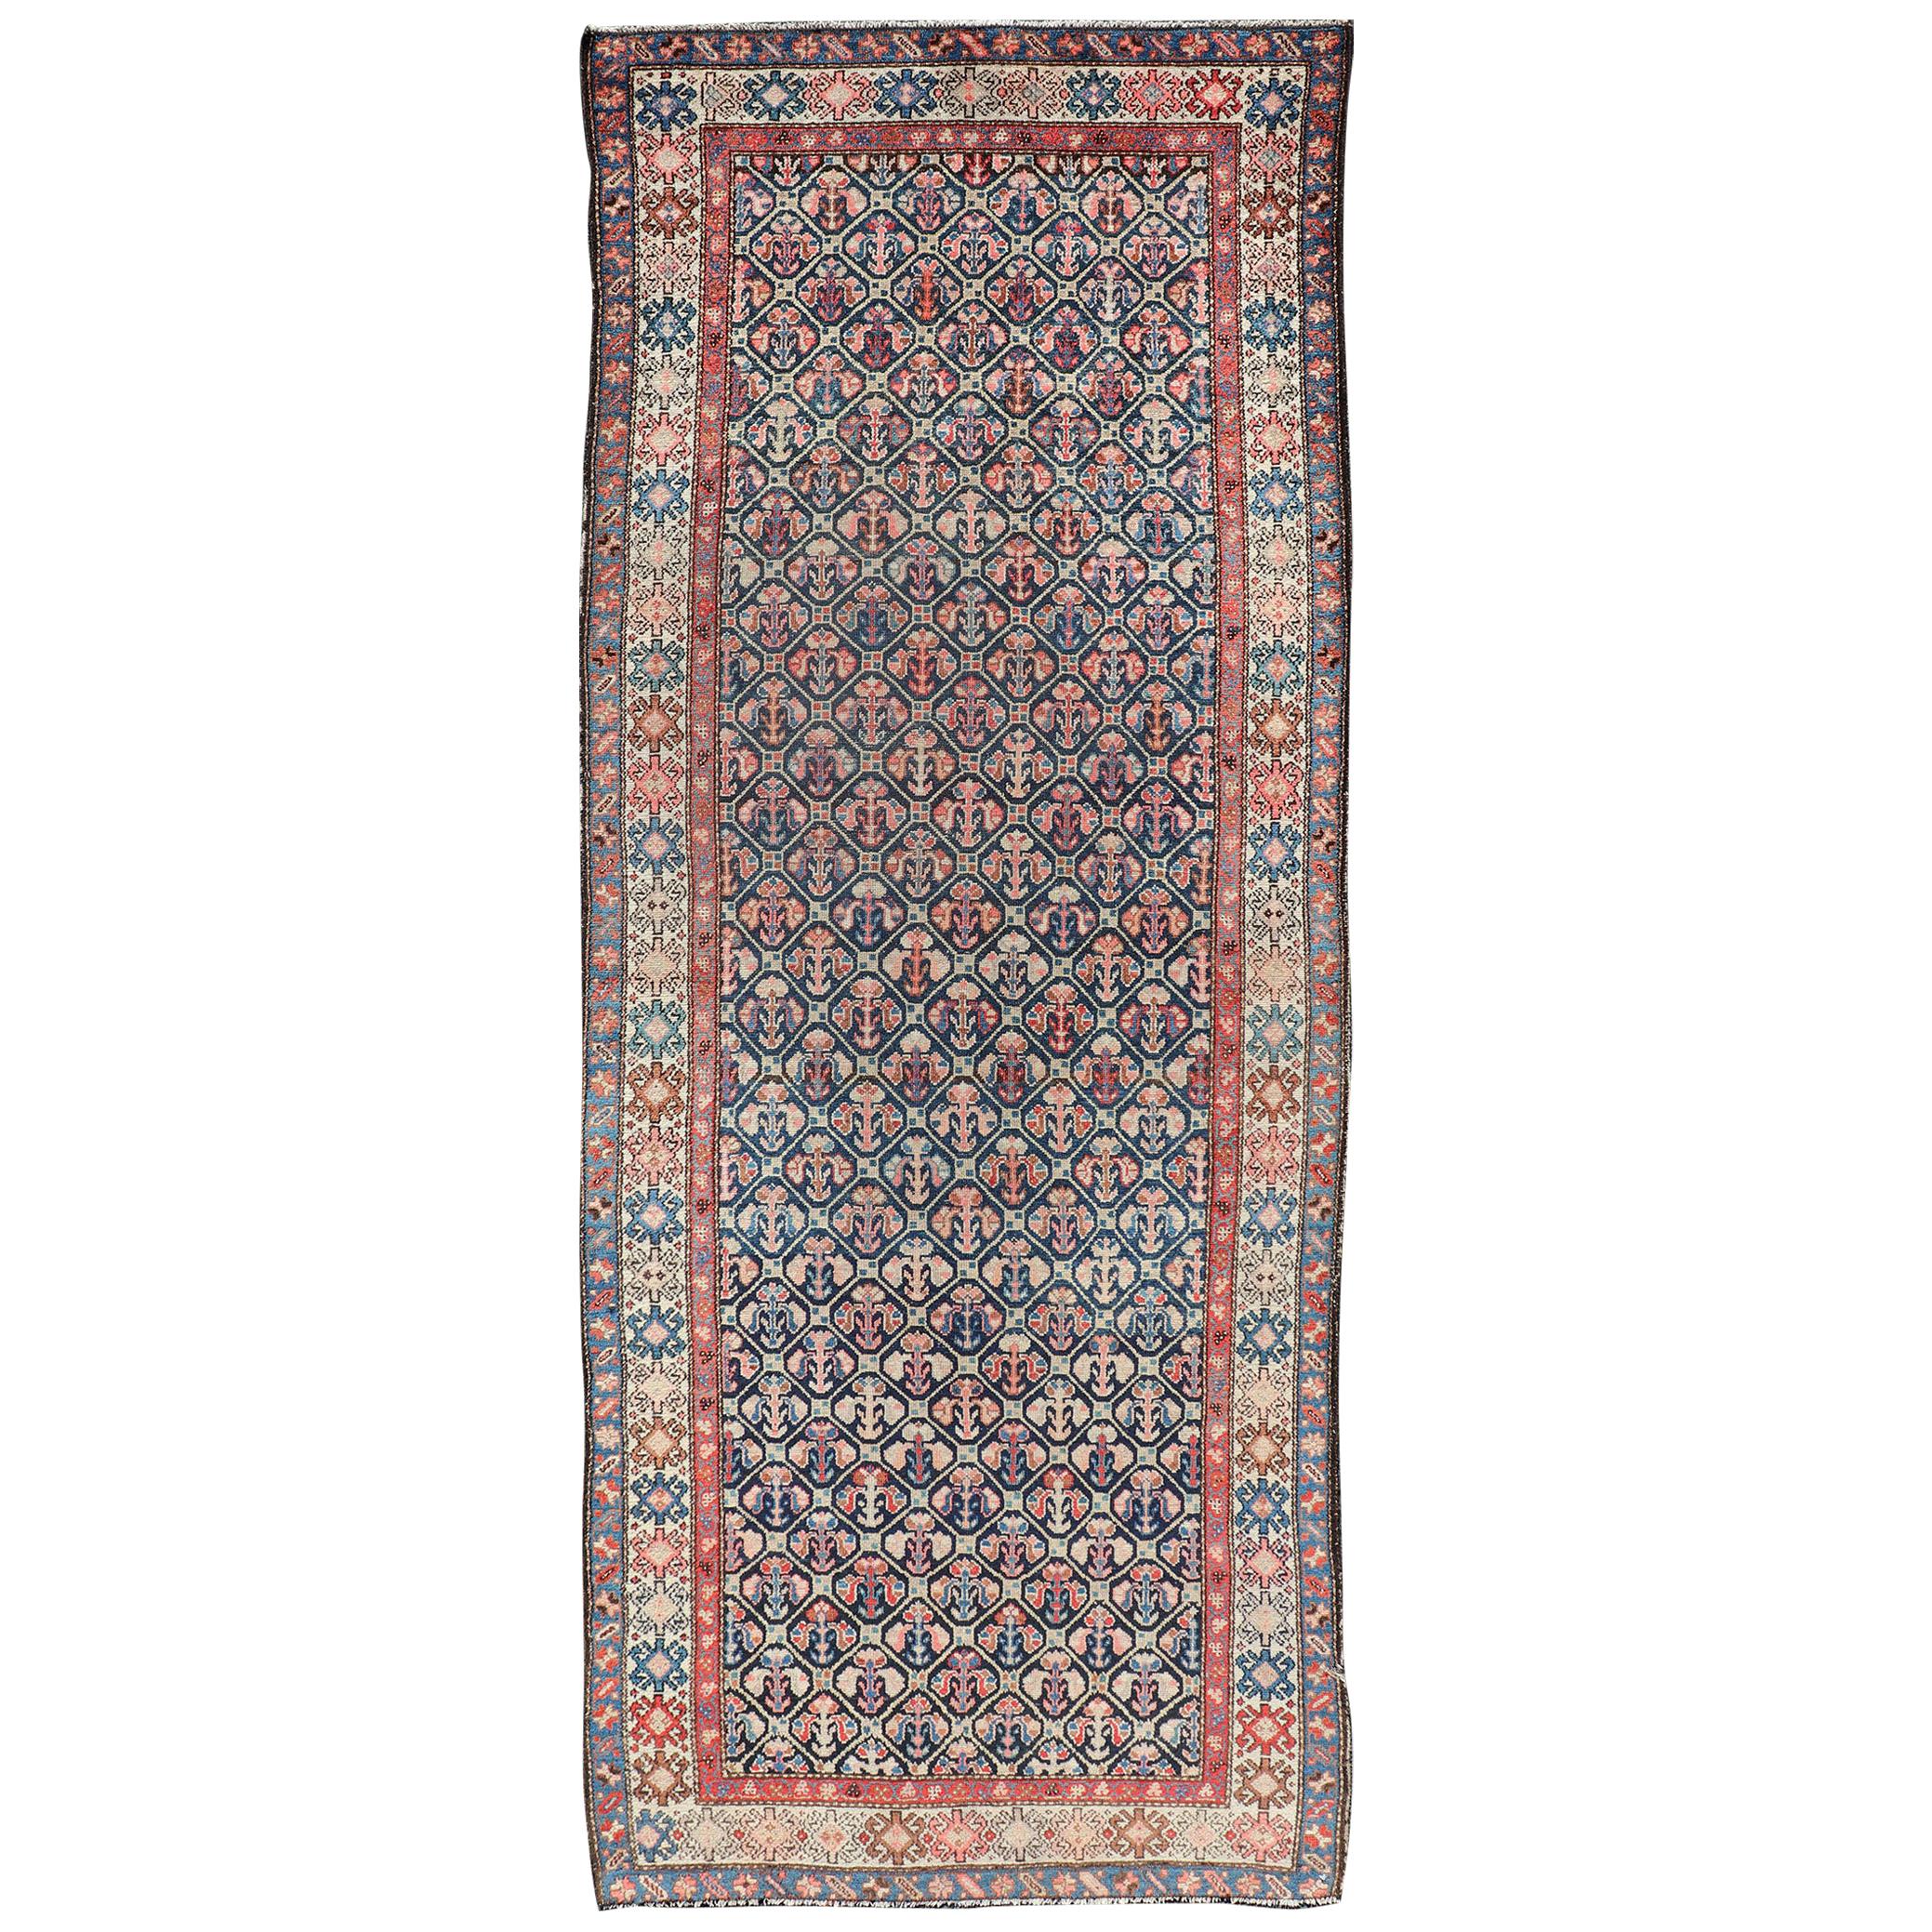 Tribal Persian Antique Hamedan Fine Rug in Blue, Red, Brown, and Ivory